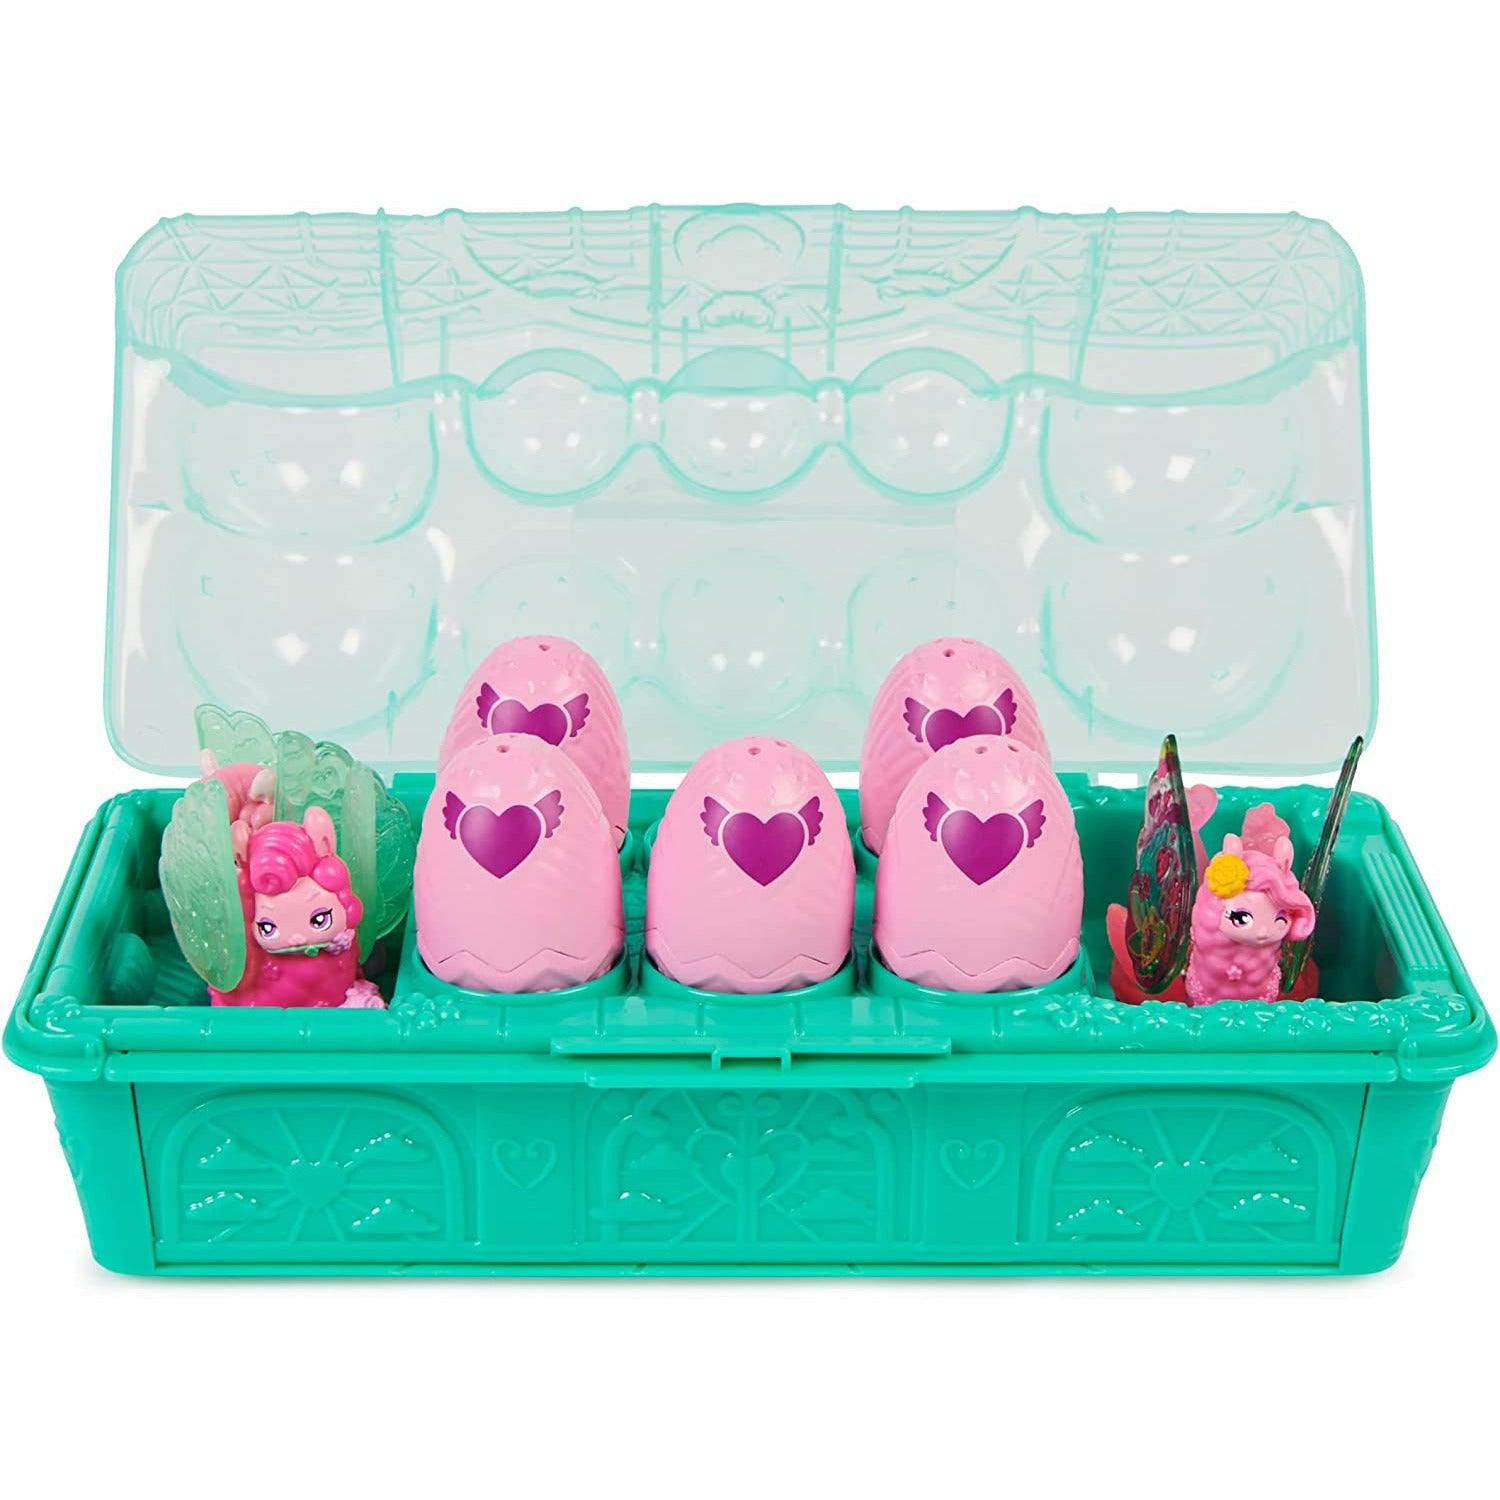 Hatchimals CollEGGtibles, Rainbow-Cation Llama Family Carton with Surprise Playset. - BumbleToys - 5-7 Years, Girls, Miniature Dolls & Accessories, Pre-Order